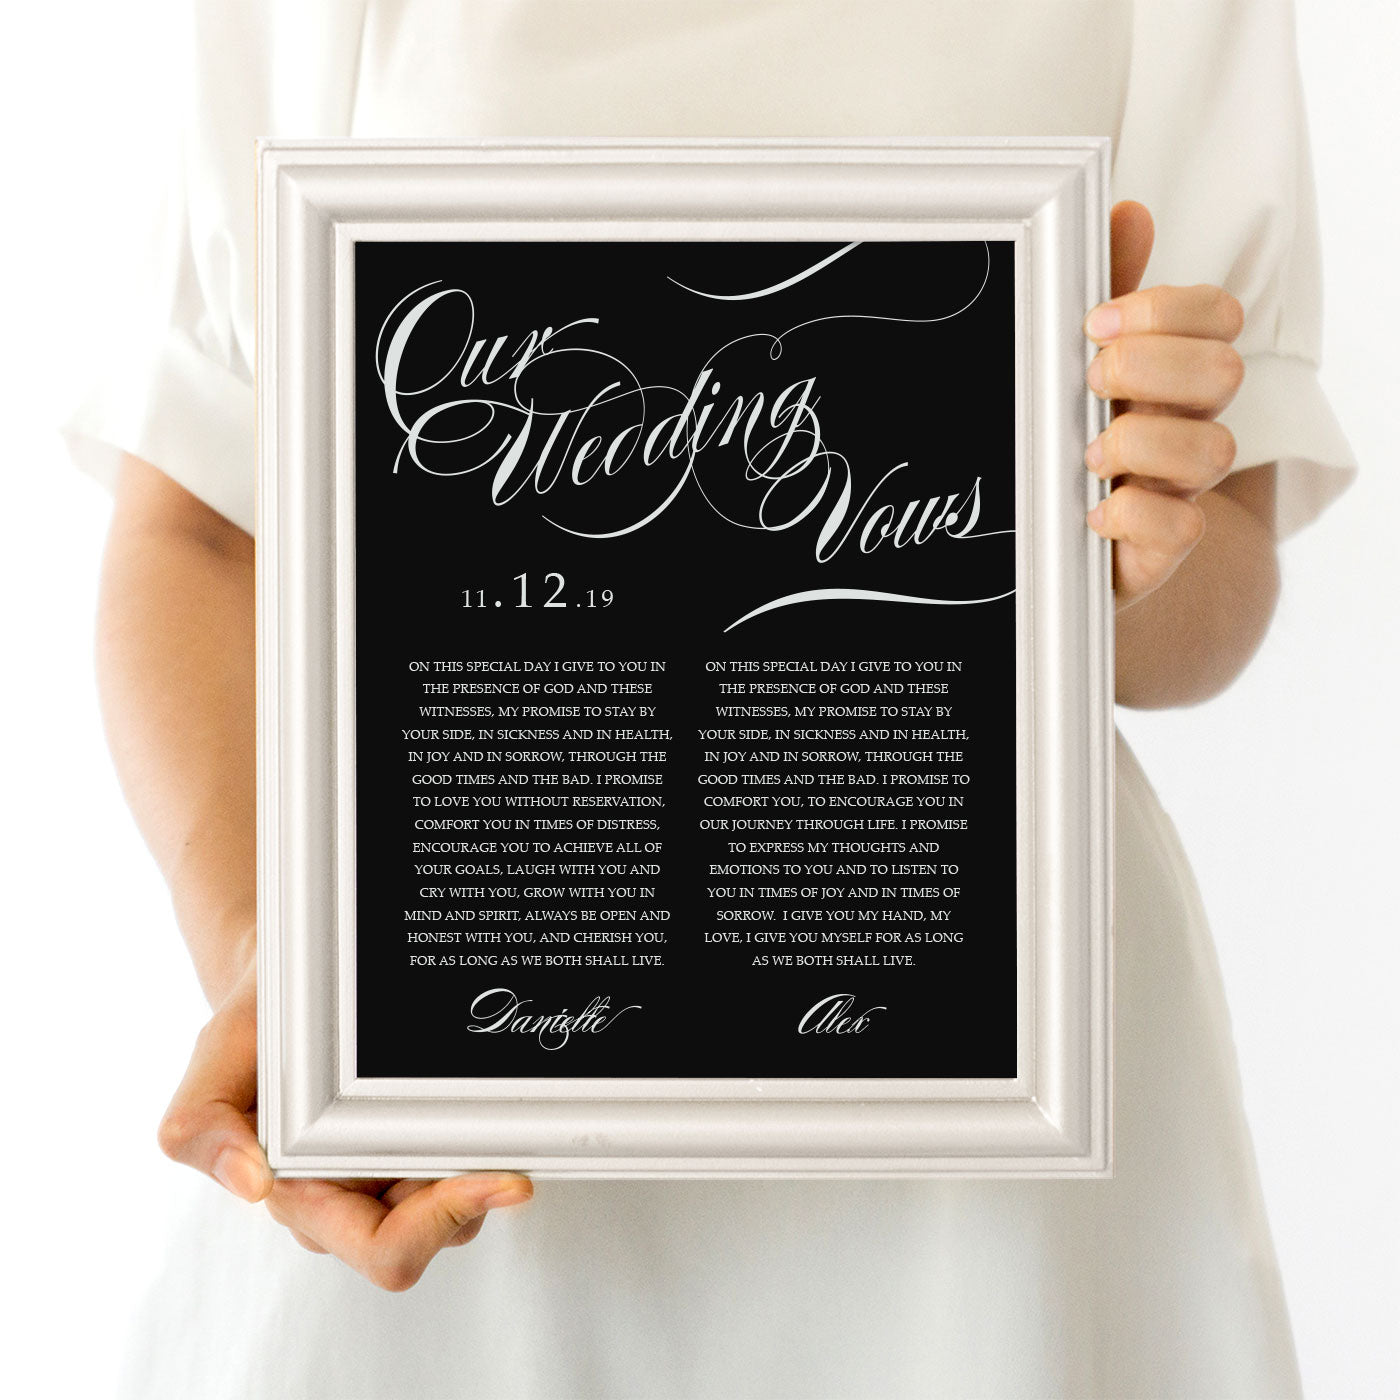 person holding frame with a wedding vow print in black and white